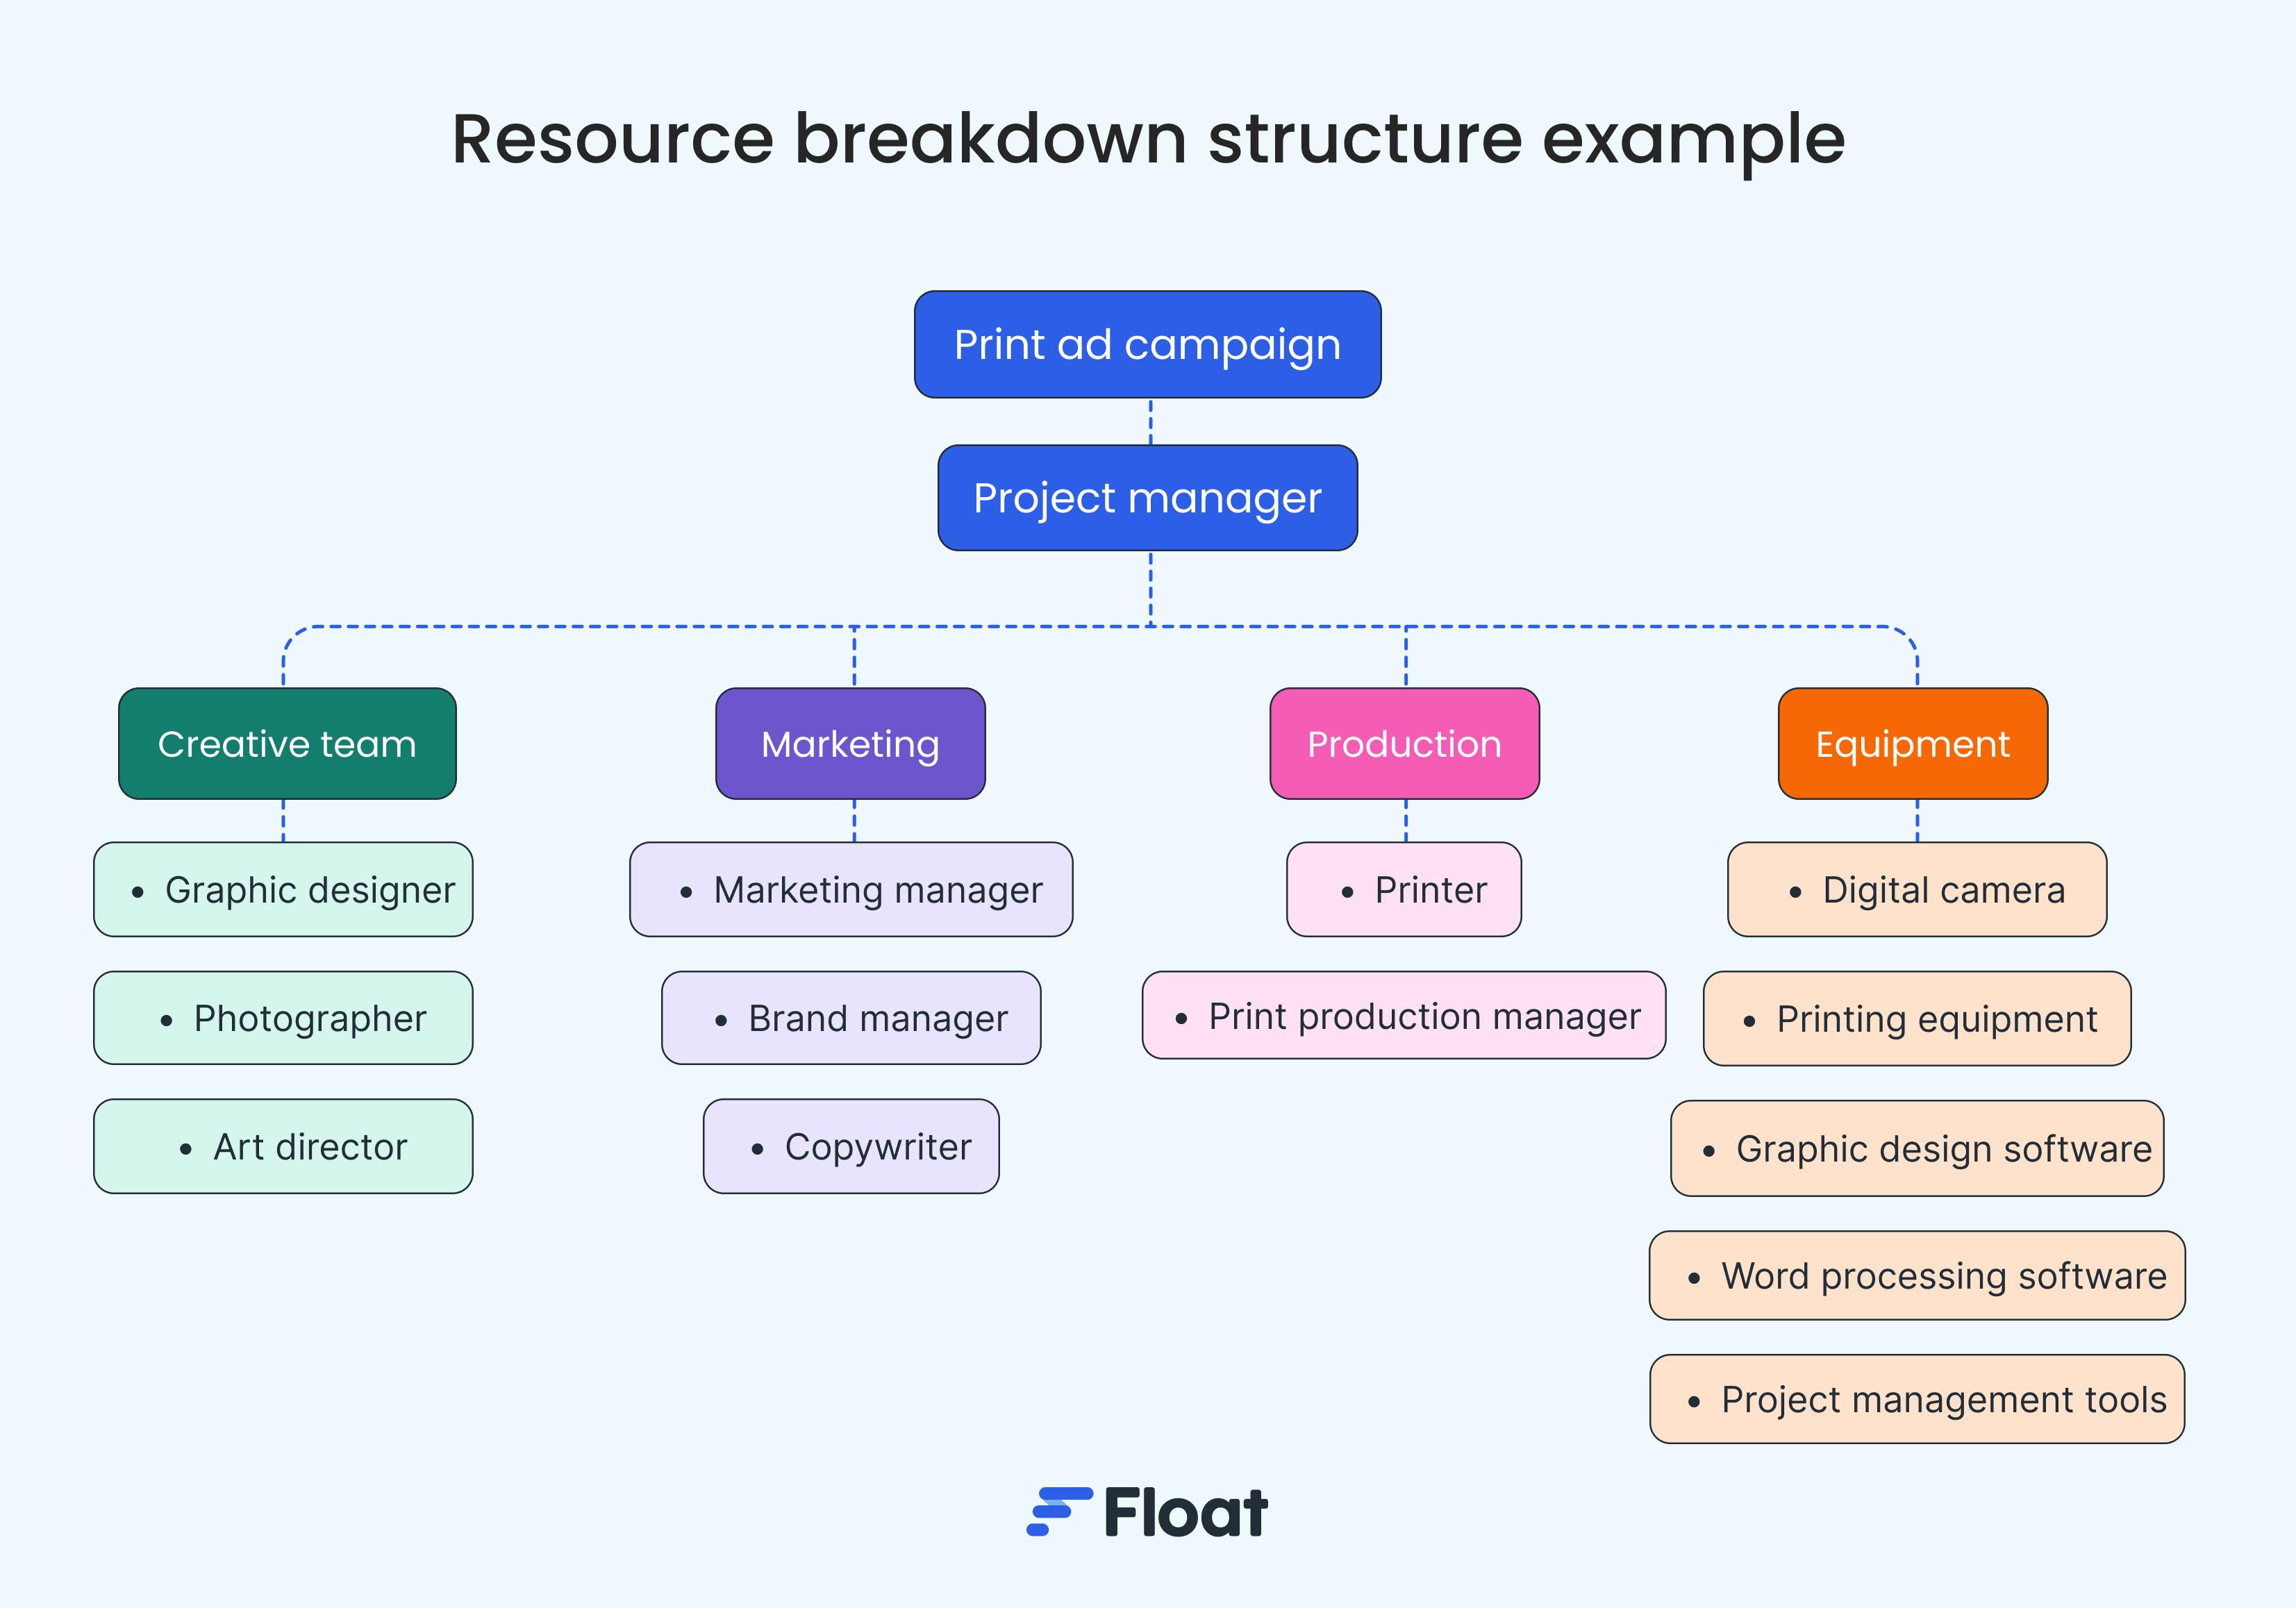 An example of a resource breakdown structure